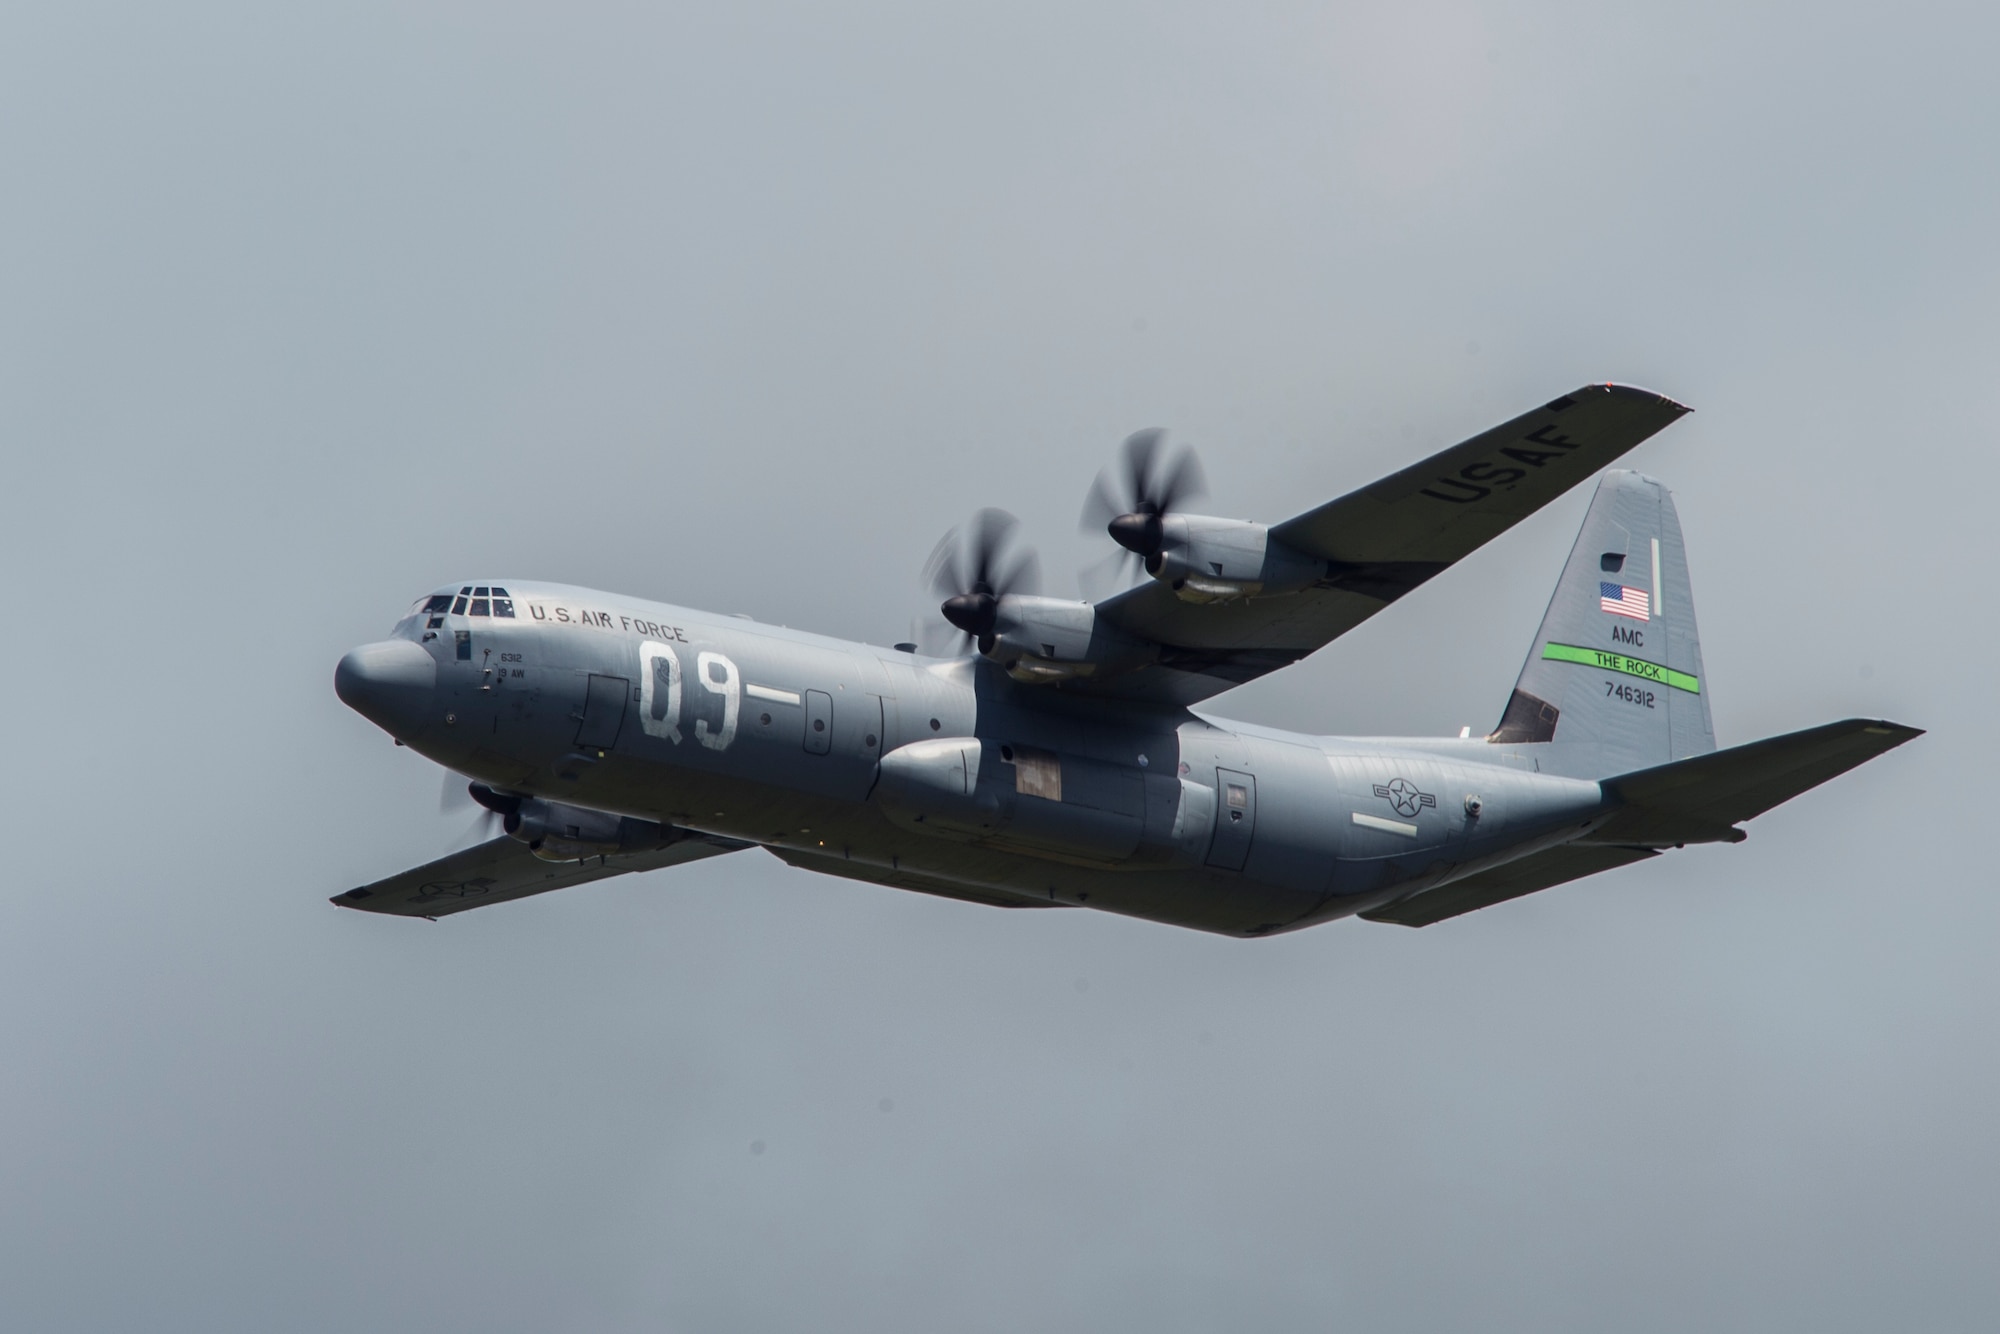 A U.S. Air Force C-130J Super Hercules, assigned to the 61st Airlift Squadron, Little Rock Air Force Base, Ark., flies over Cherbourg-Maupertus Airport, France, June 6, 2019. The 61st AS’ lineage stems from the 61st Troop Carrier Squadron, who wore the “Q9” identifier during the airdrops conducted over Normandy during Operation Neptune June 6, 1944. (U.S. Air Force photo by Senior Airman Devin M. Rumbaugh)